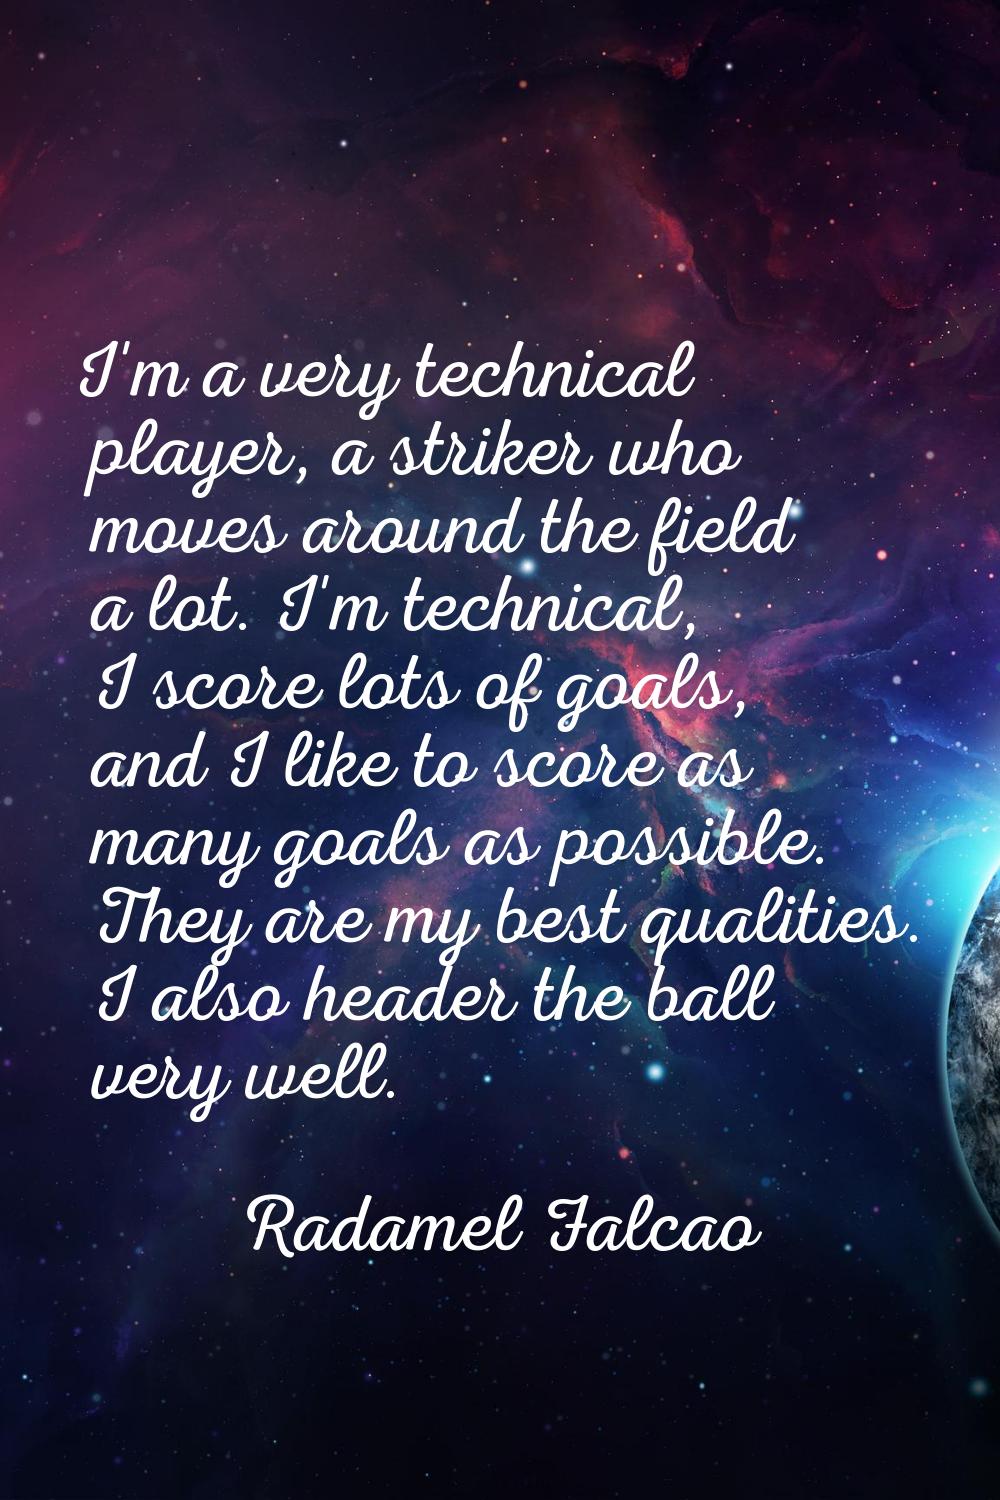 I'm a very technical player, a striker who moves around the field a lot. I'm technical, I score lot